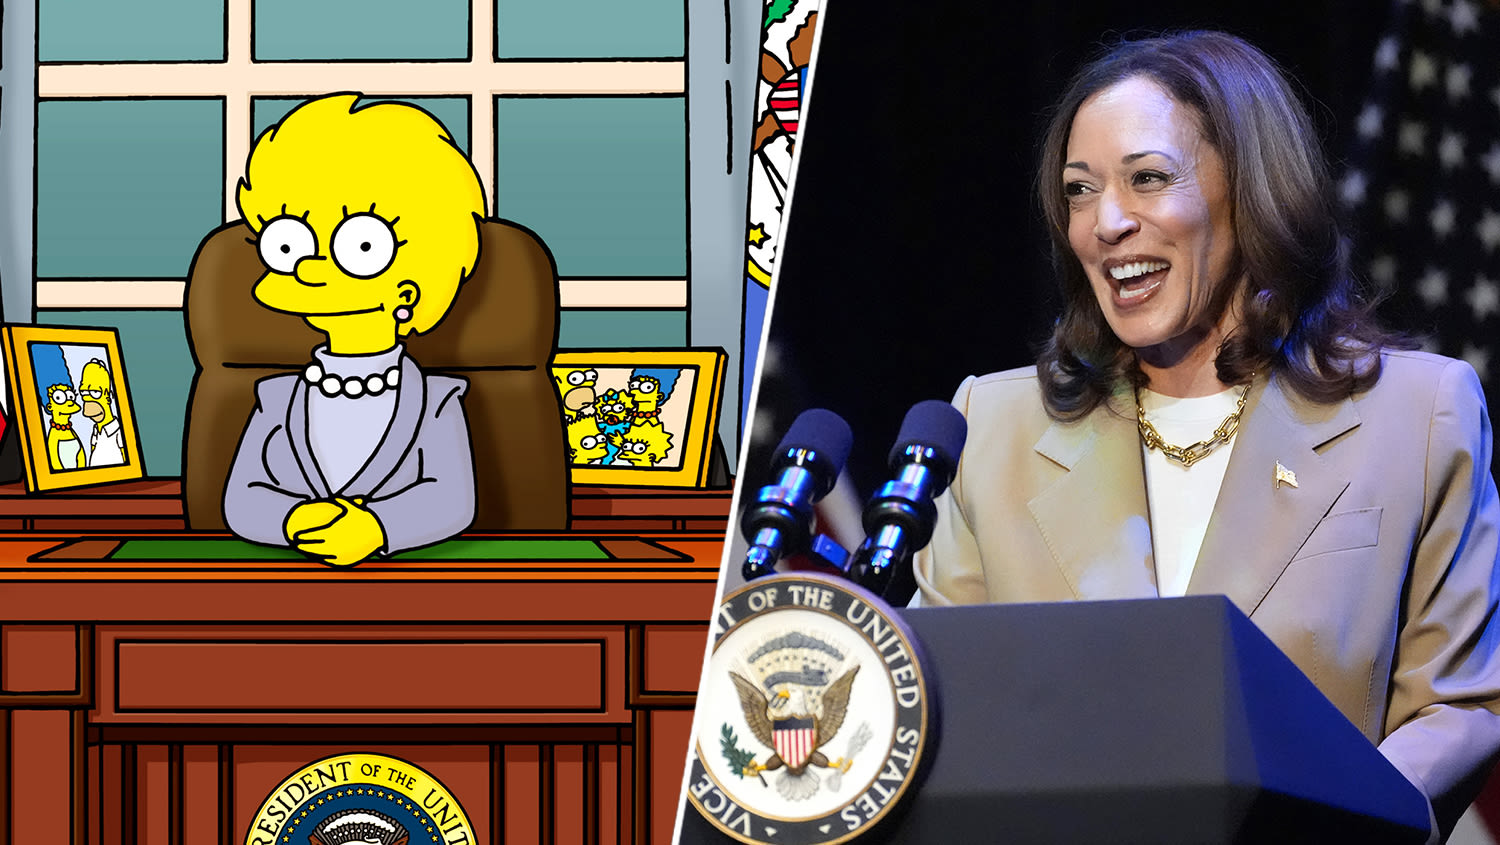 Kamala Harris Makes Surprise Comic-Con Video Appearance During ‘The Simpsons’ Panel